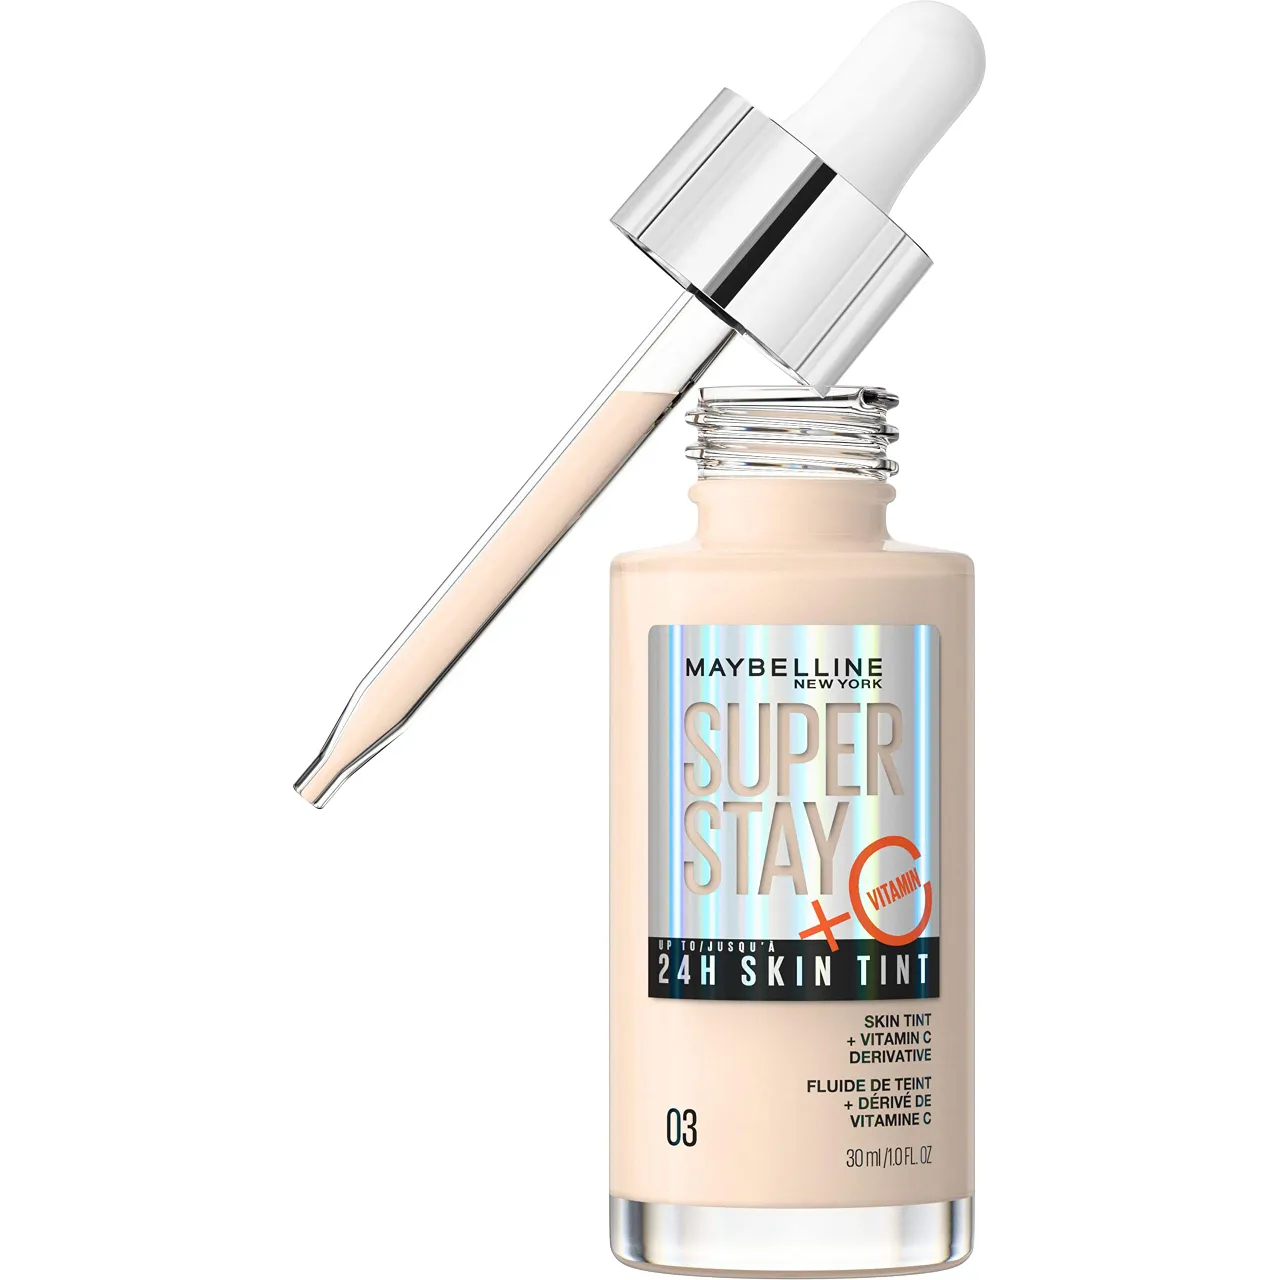 Maybelline New York Super Stay Up Up Up 24 uur Skin